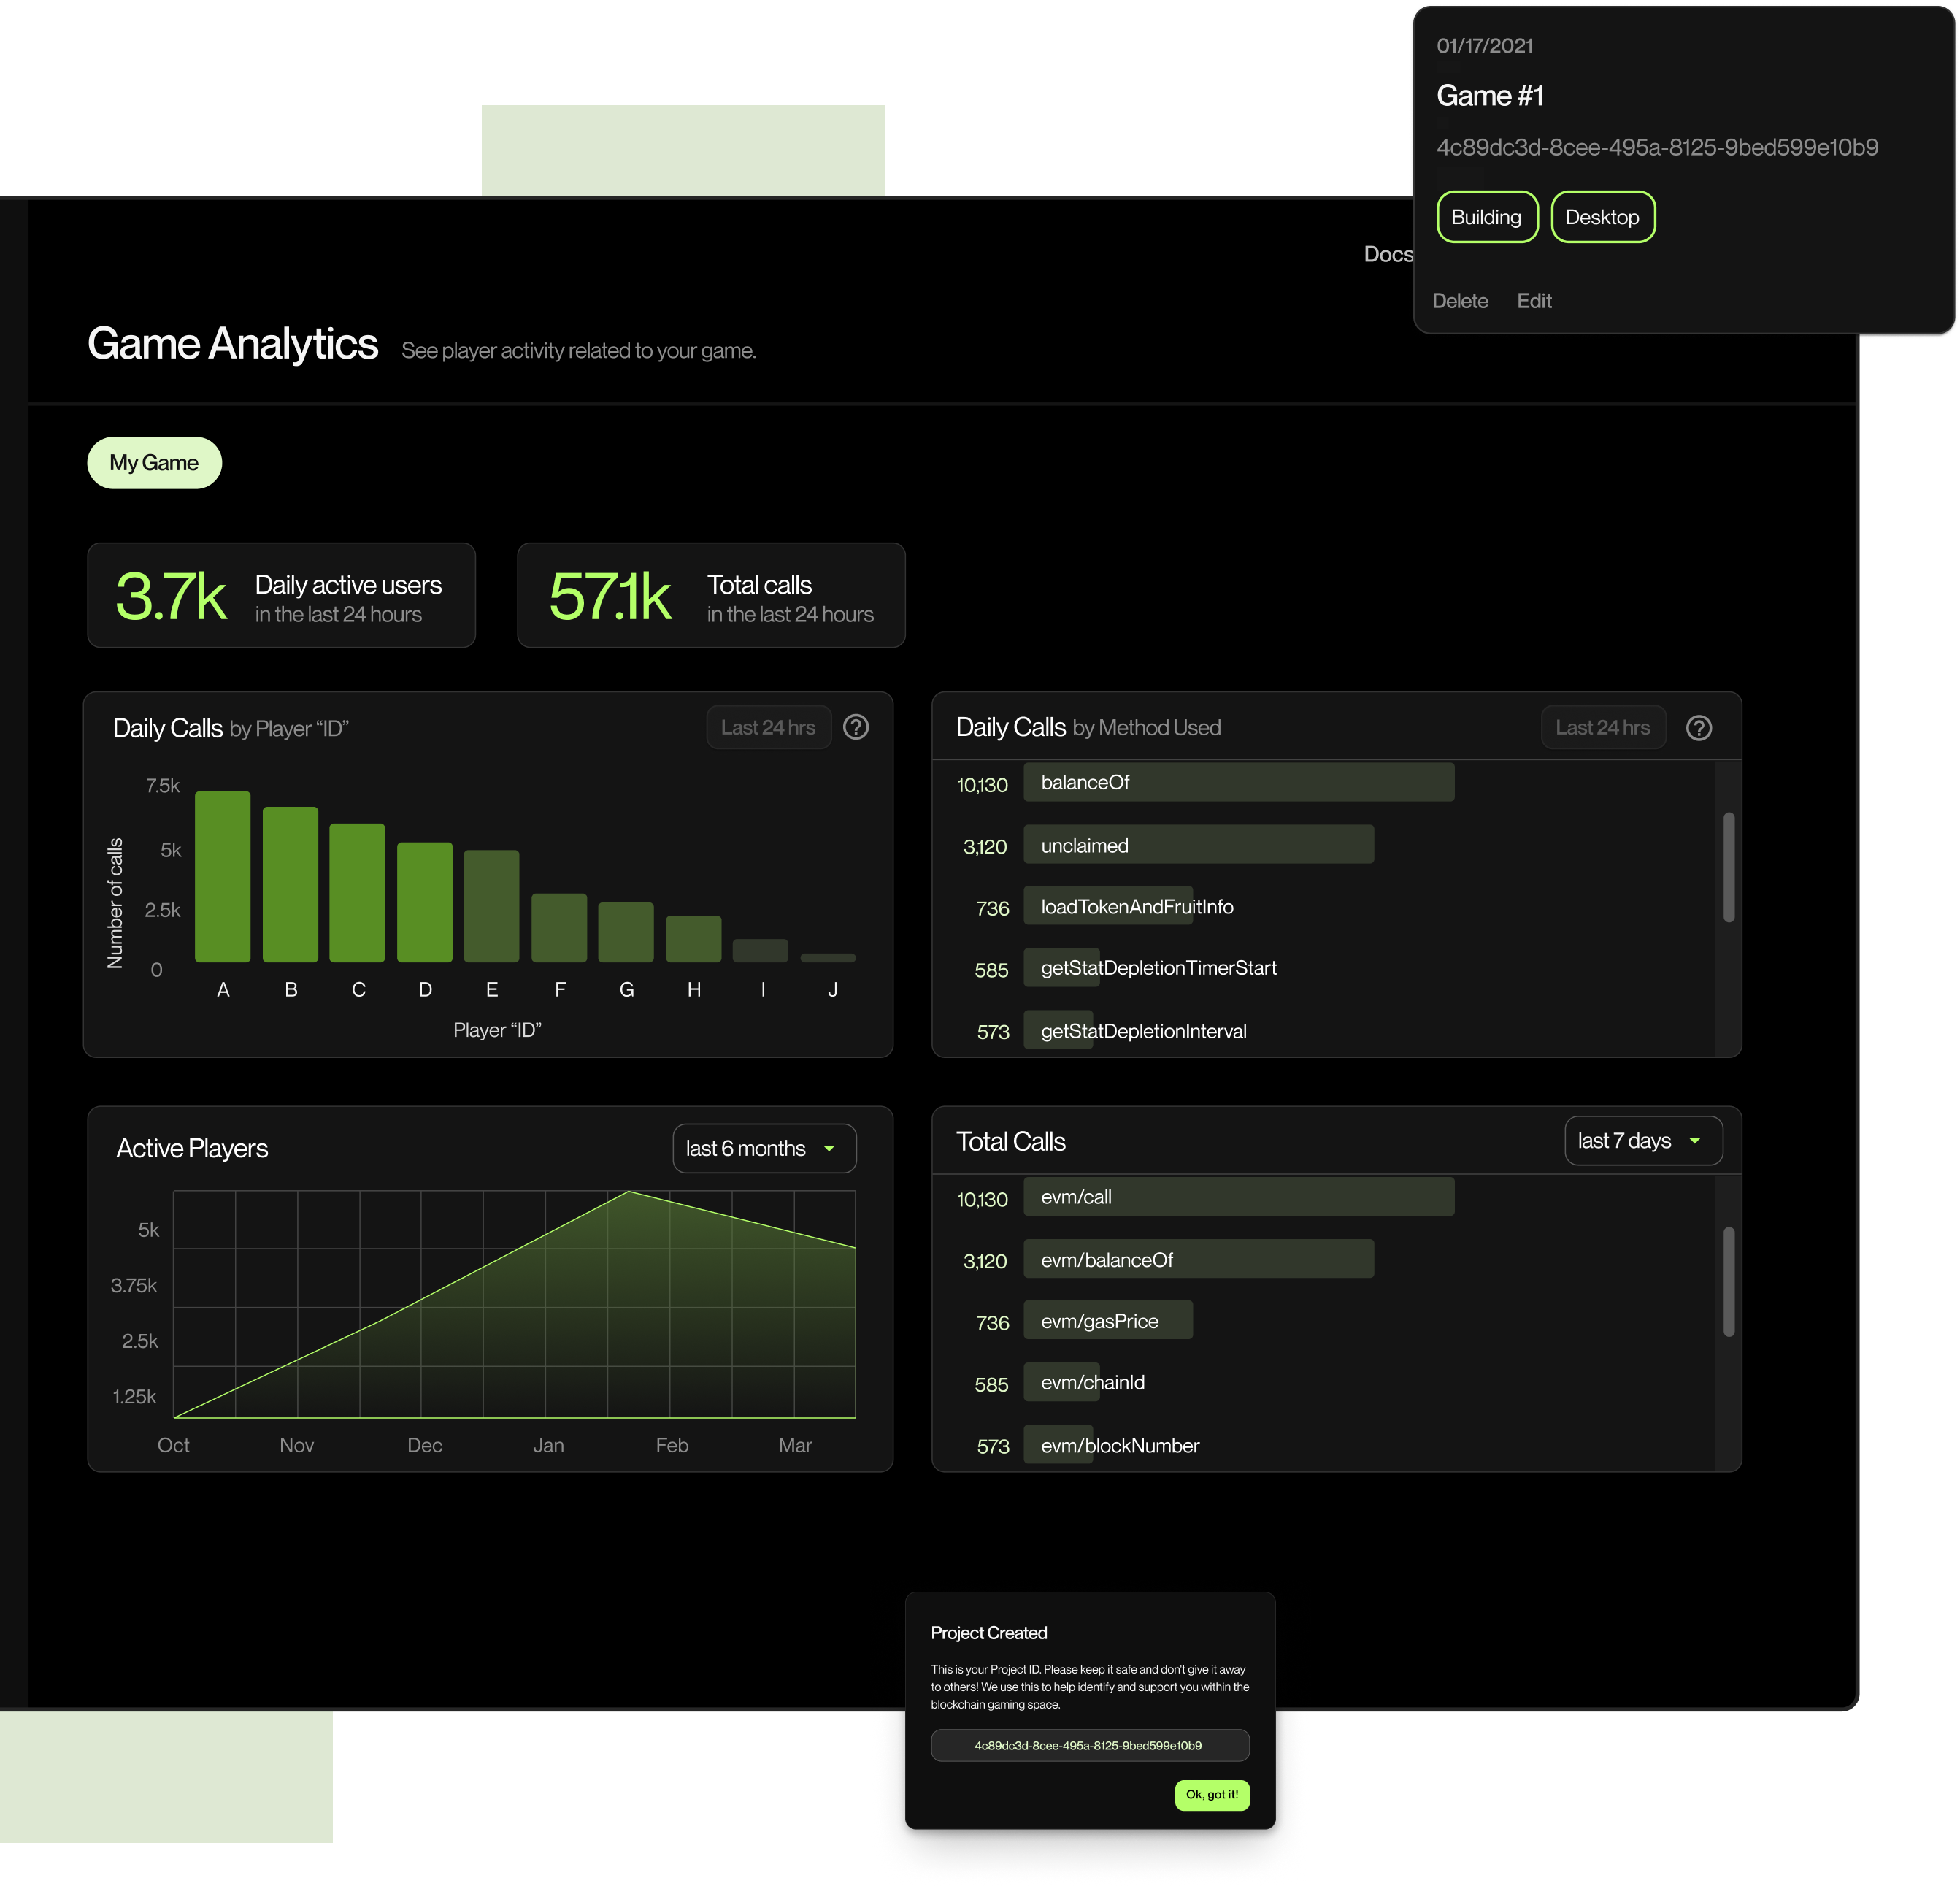 ChainSafe Gaming dashboard displaying analytics and insights for game developers.